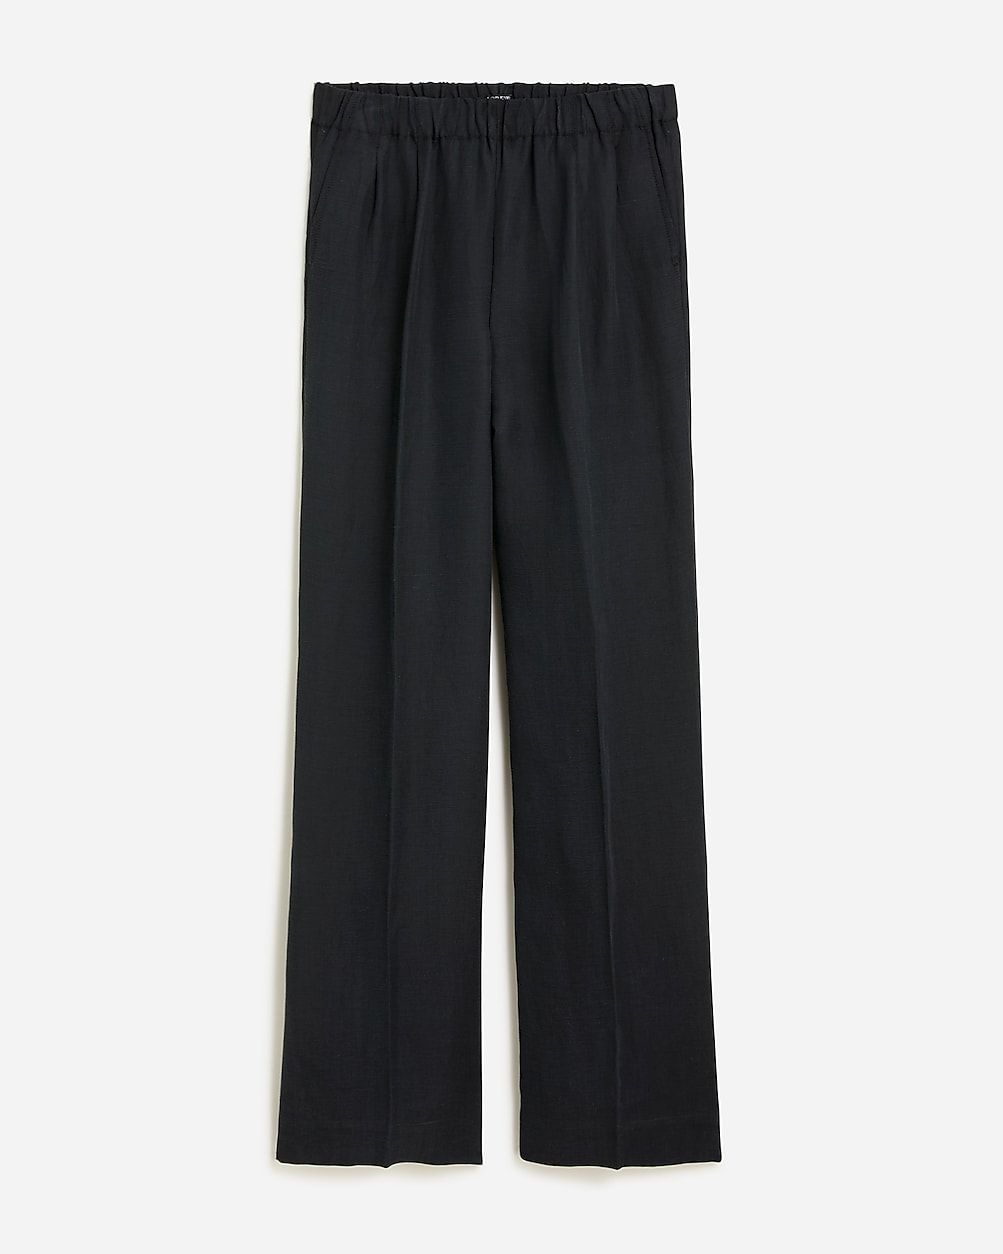 Pleated pull-on pant in linen-cupro blend | J.Crew US